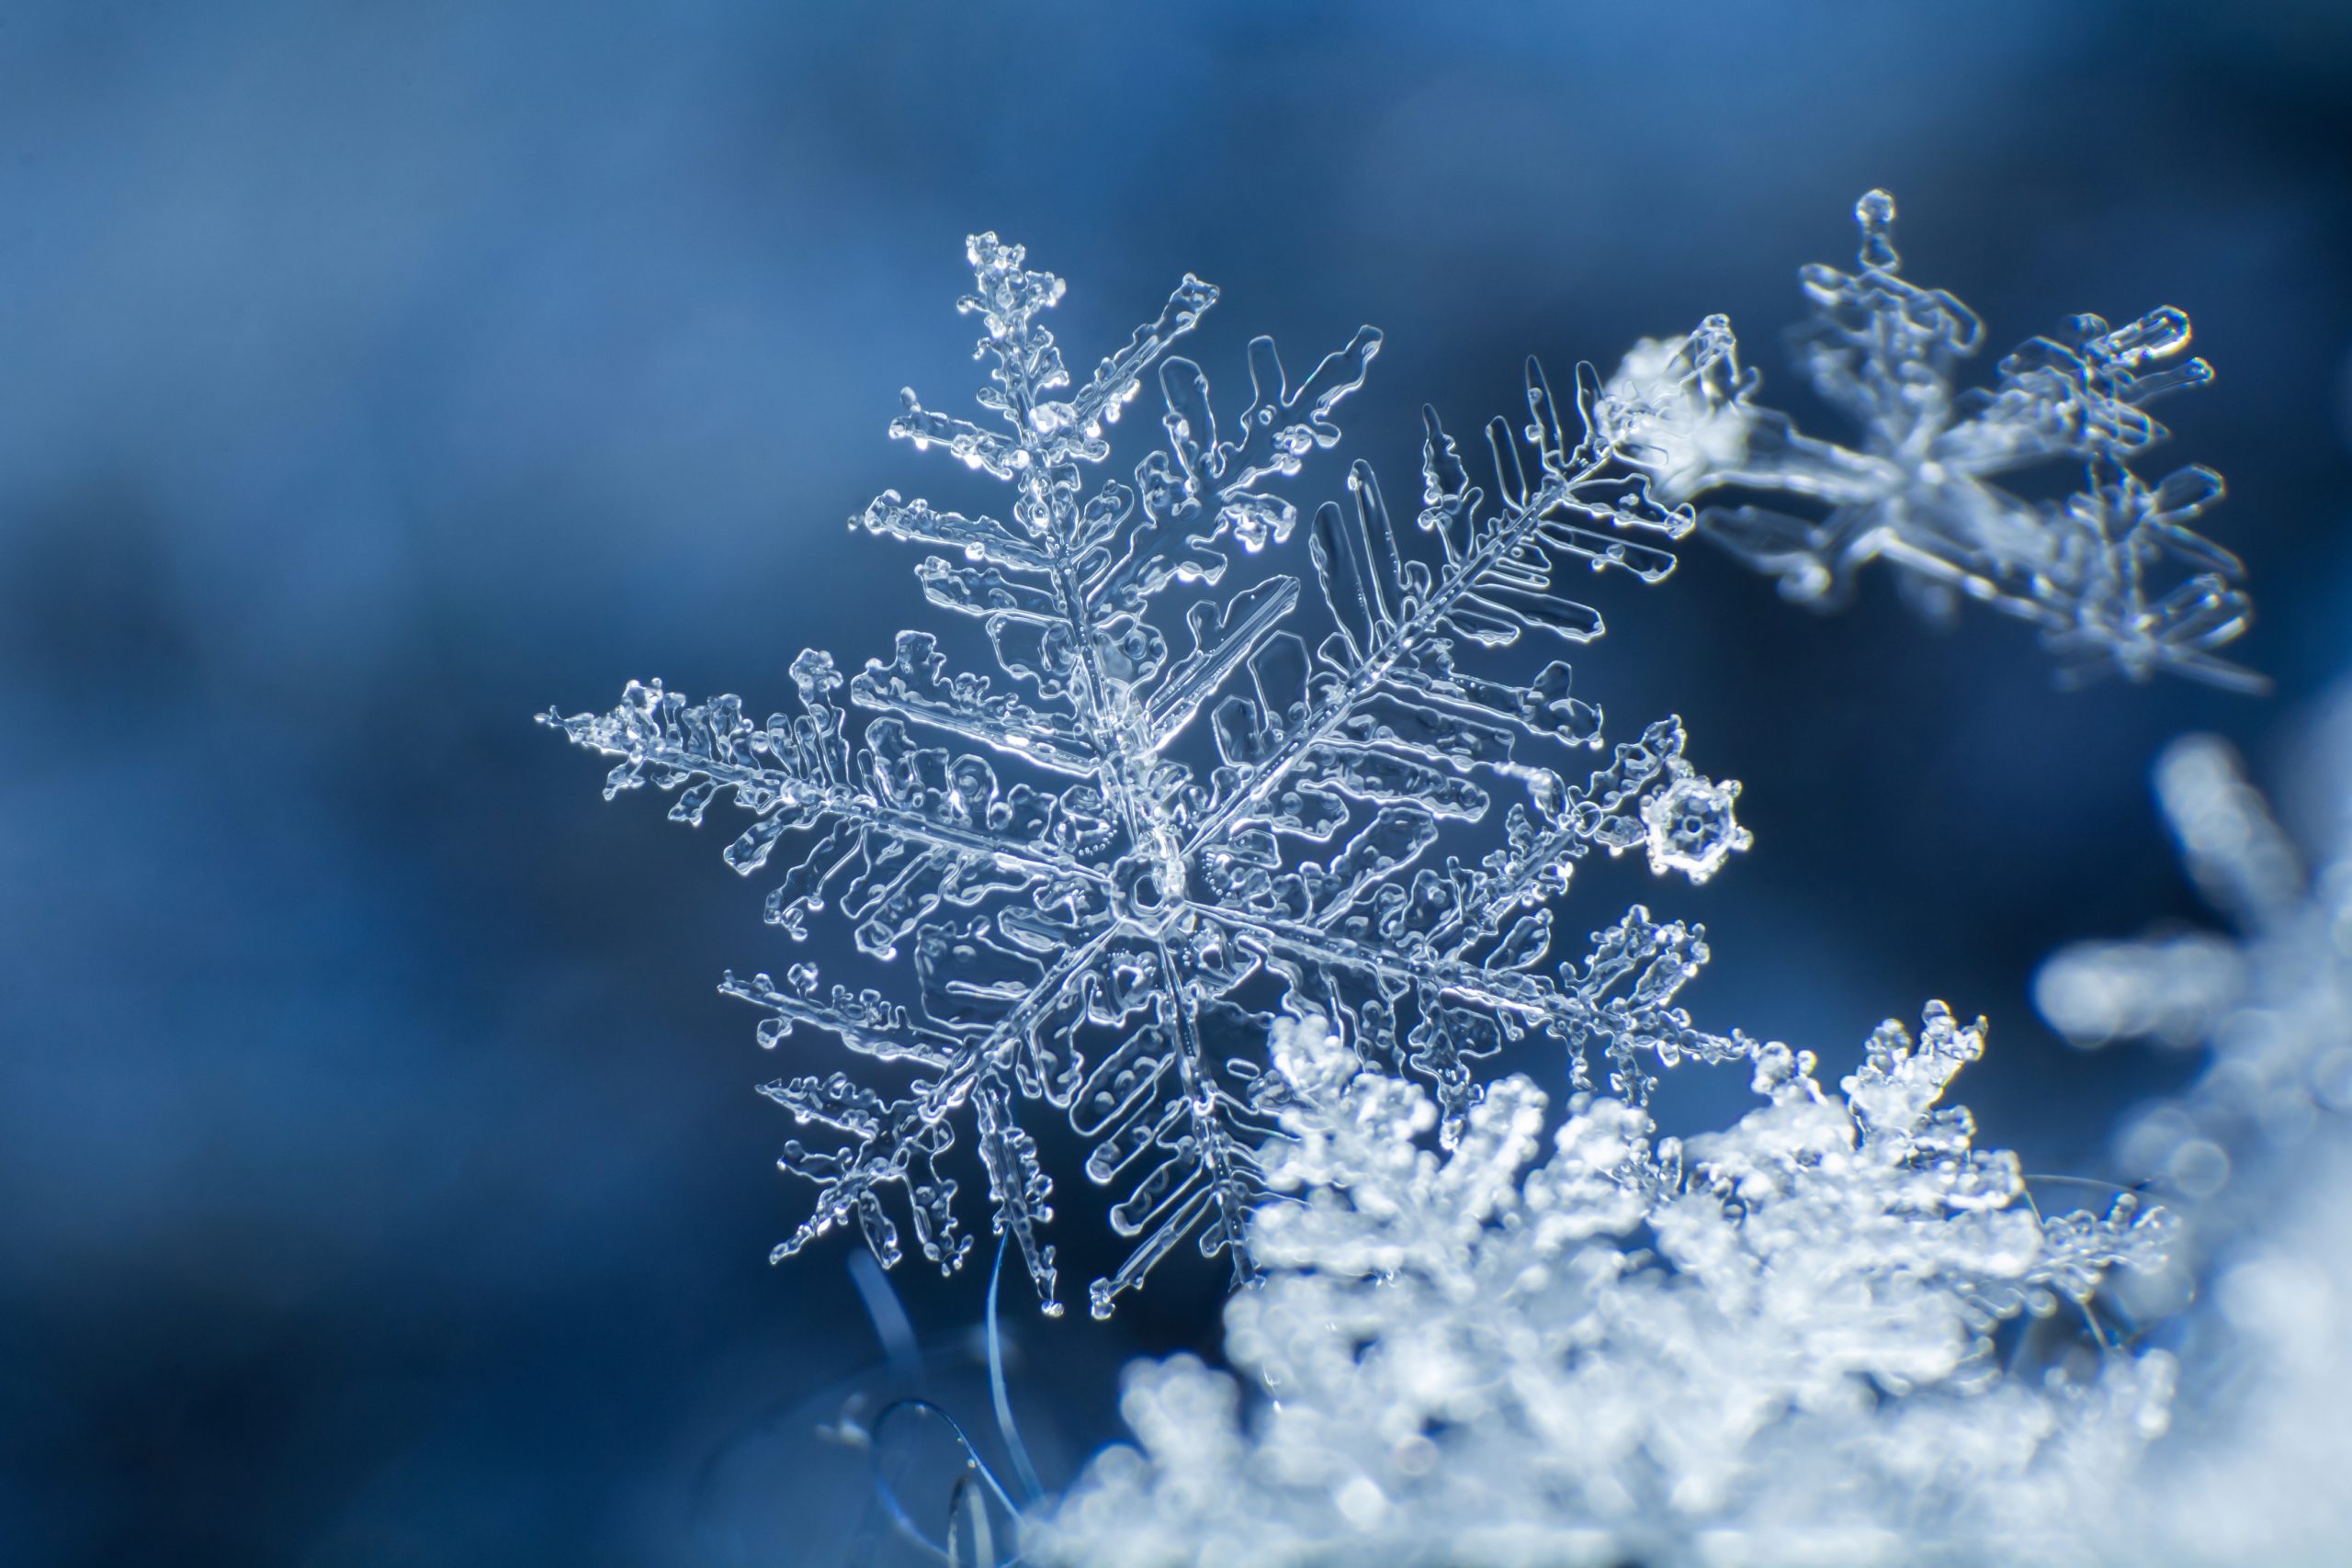 Snowflake,On,A,Blue,Background